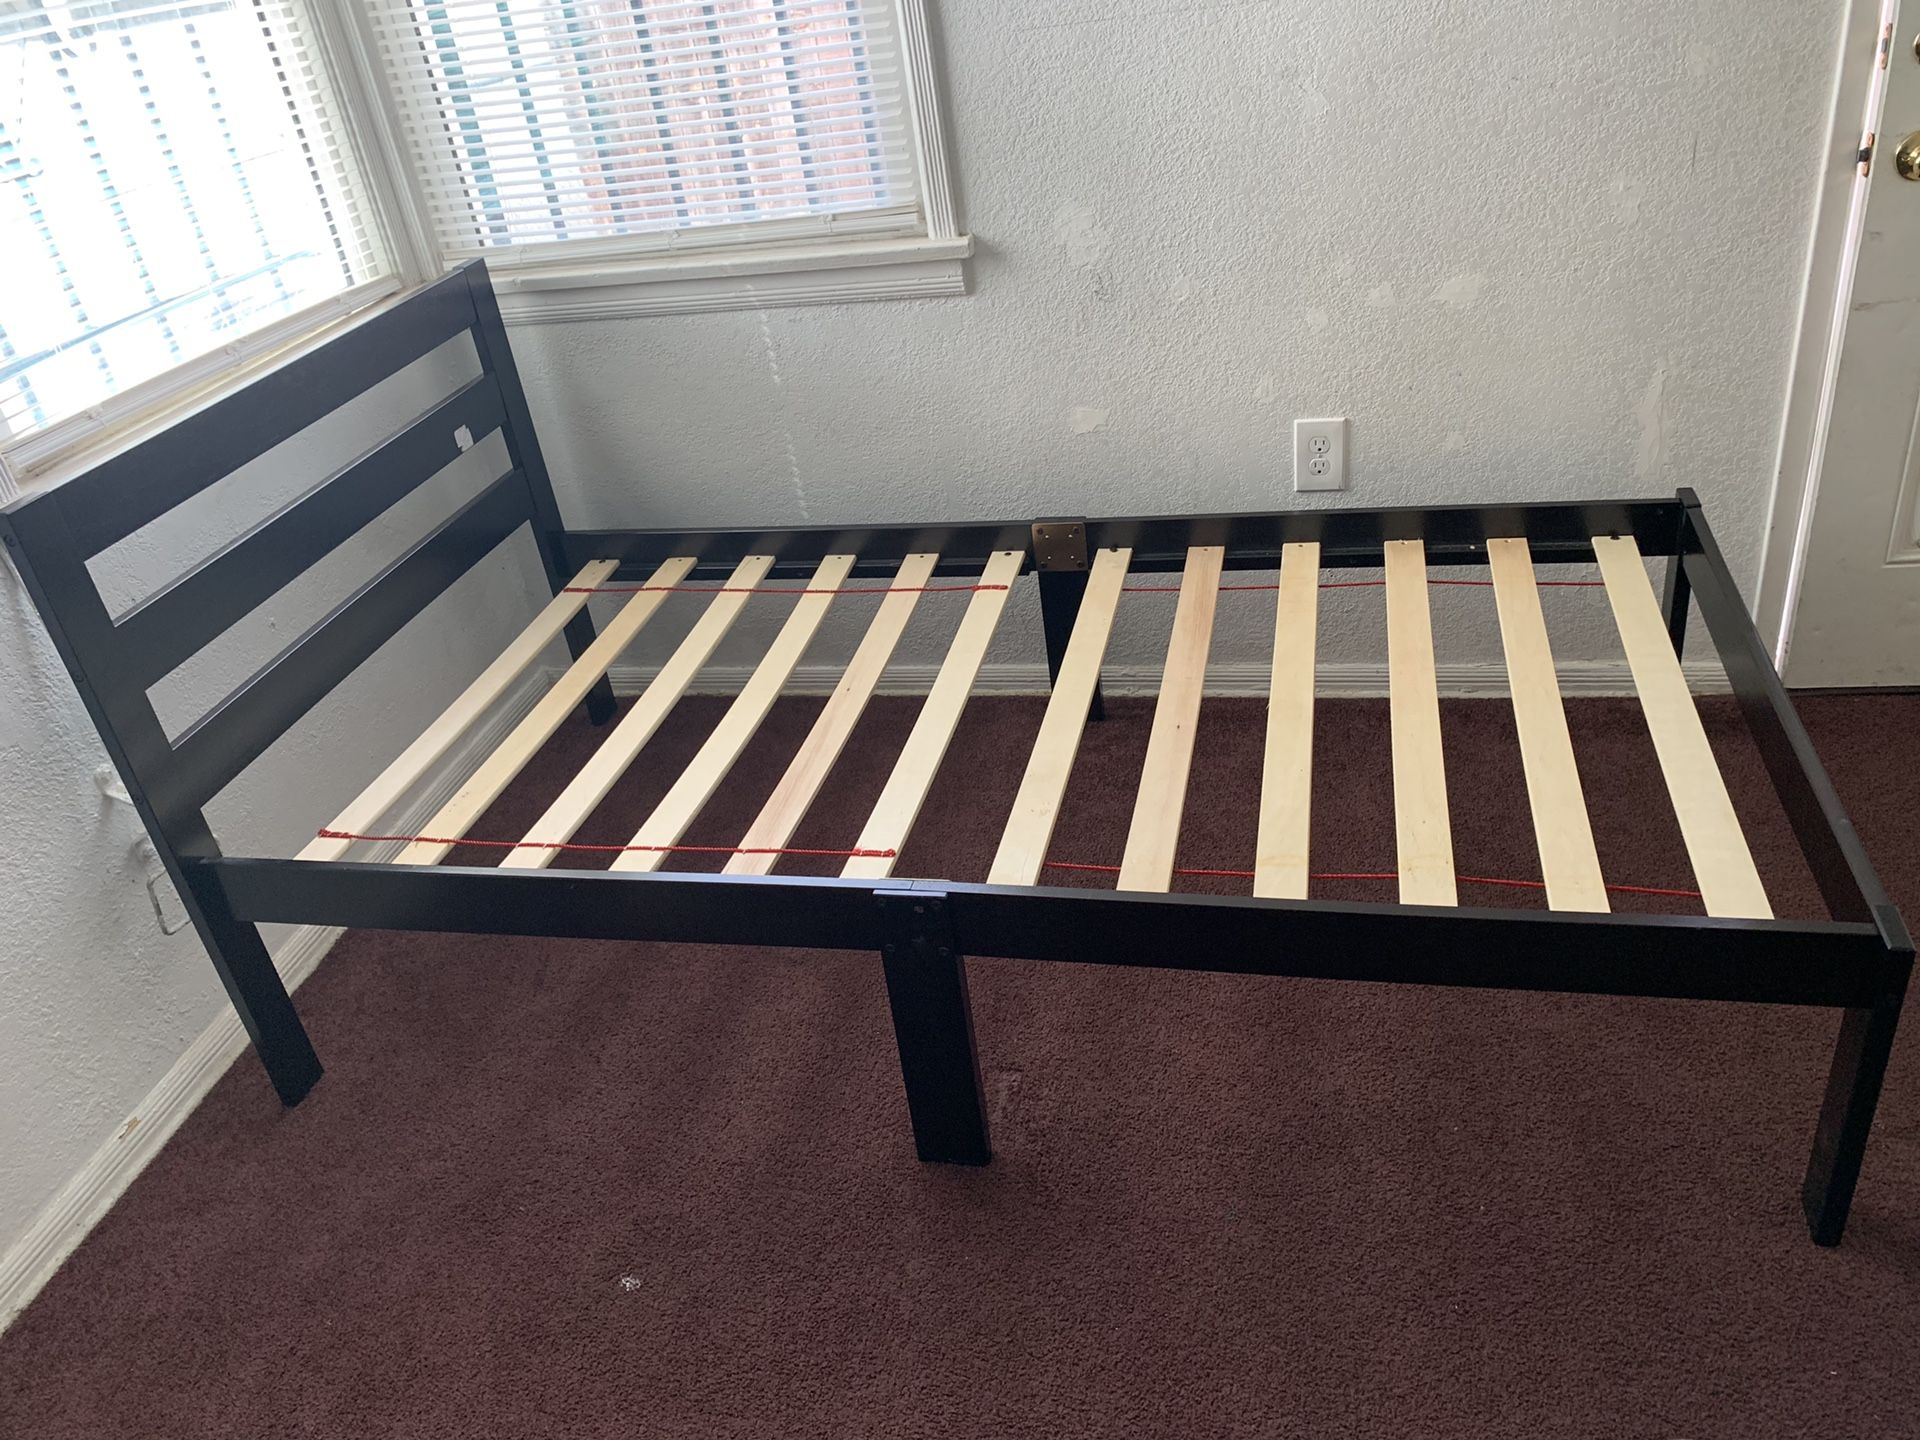 Twin Bed Wood Frame Sturdy For Sale Like New Only Used From A Month Moving Asking $20